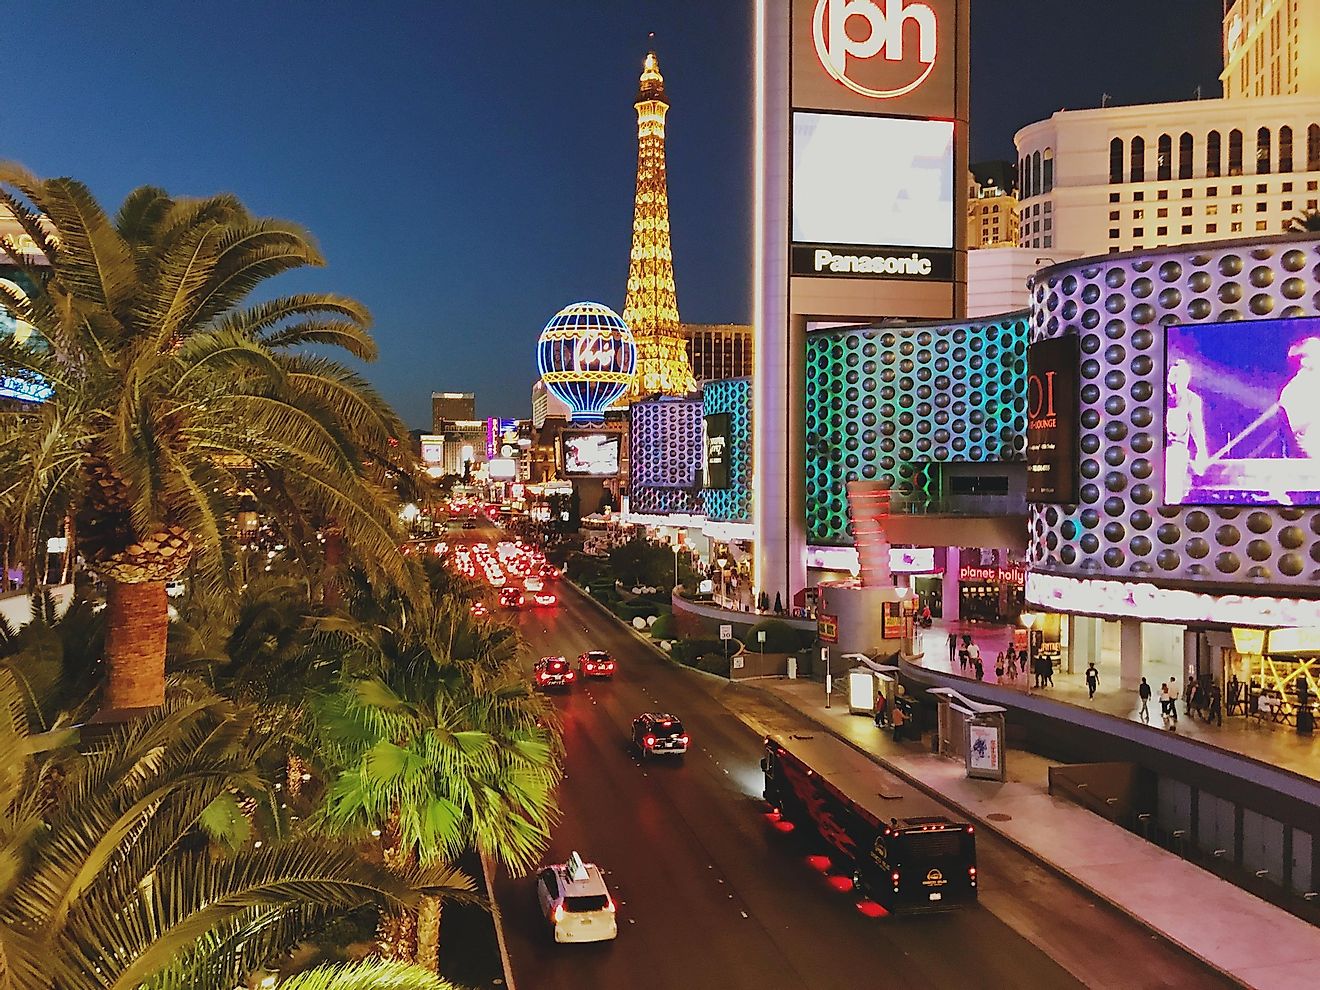 Las Vegas is still an enjoyable vacation destination even if you don't gamble at all.